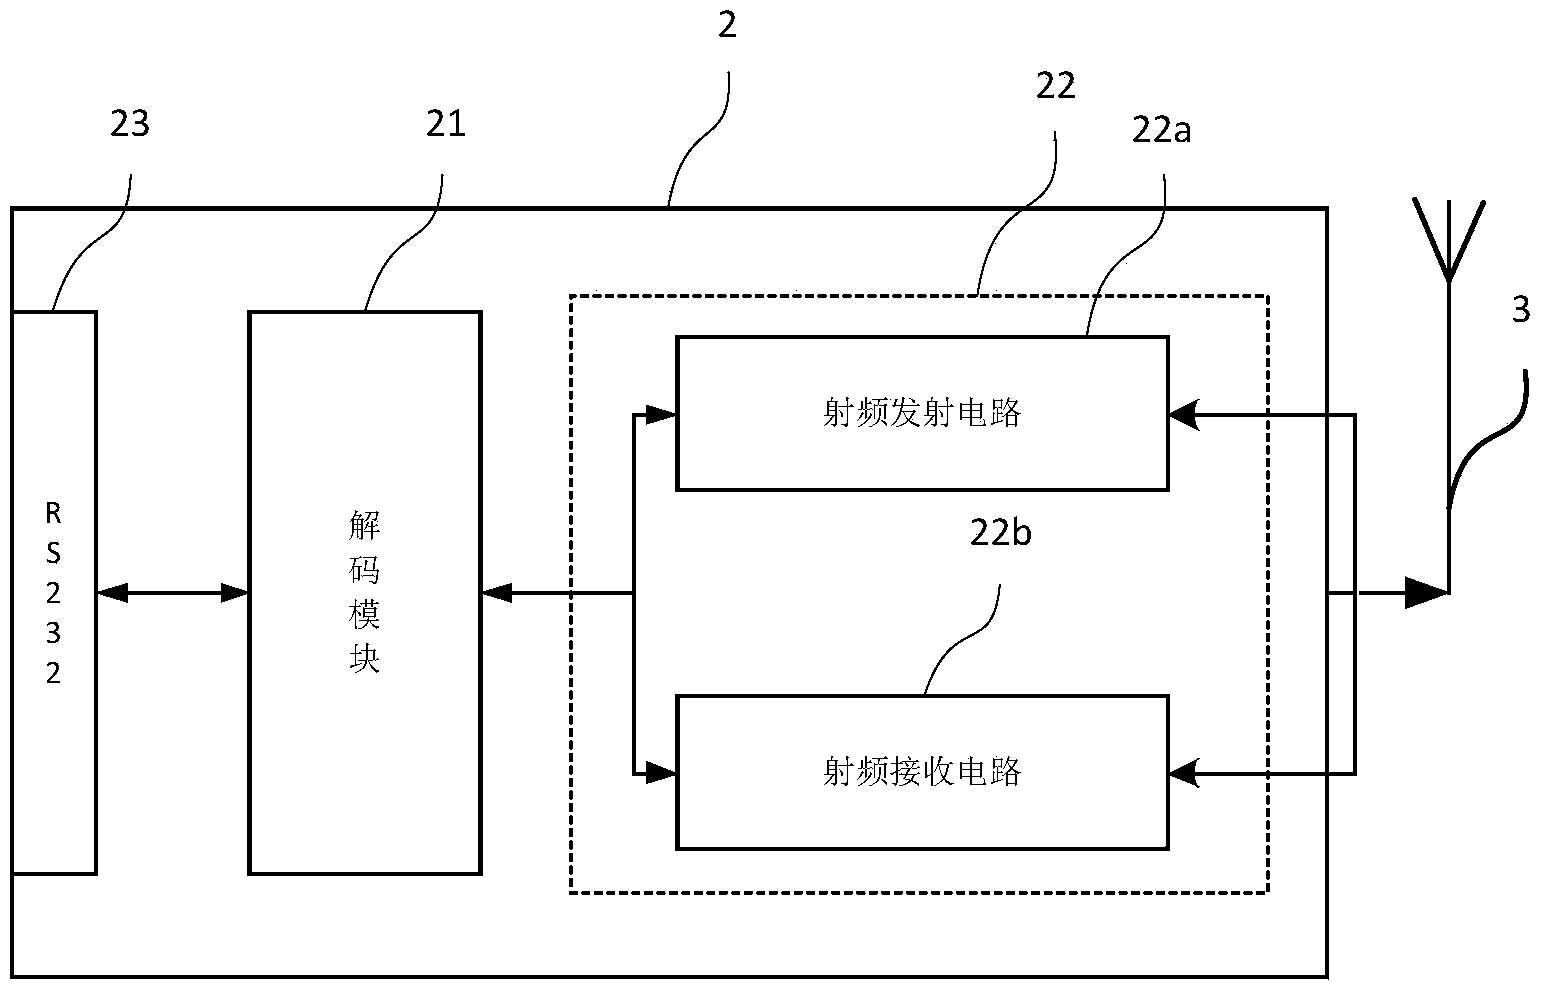 Auto vehicle identification device based on radio frequency identification technology